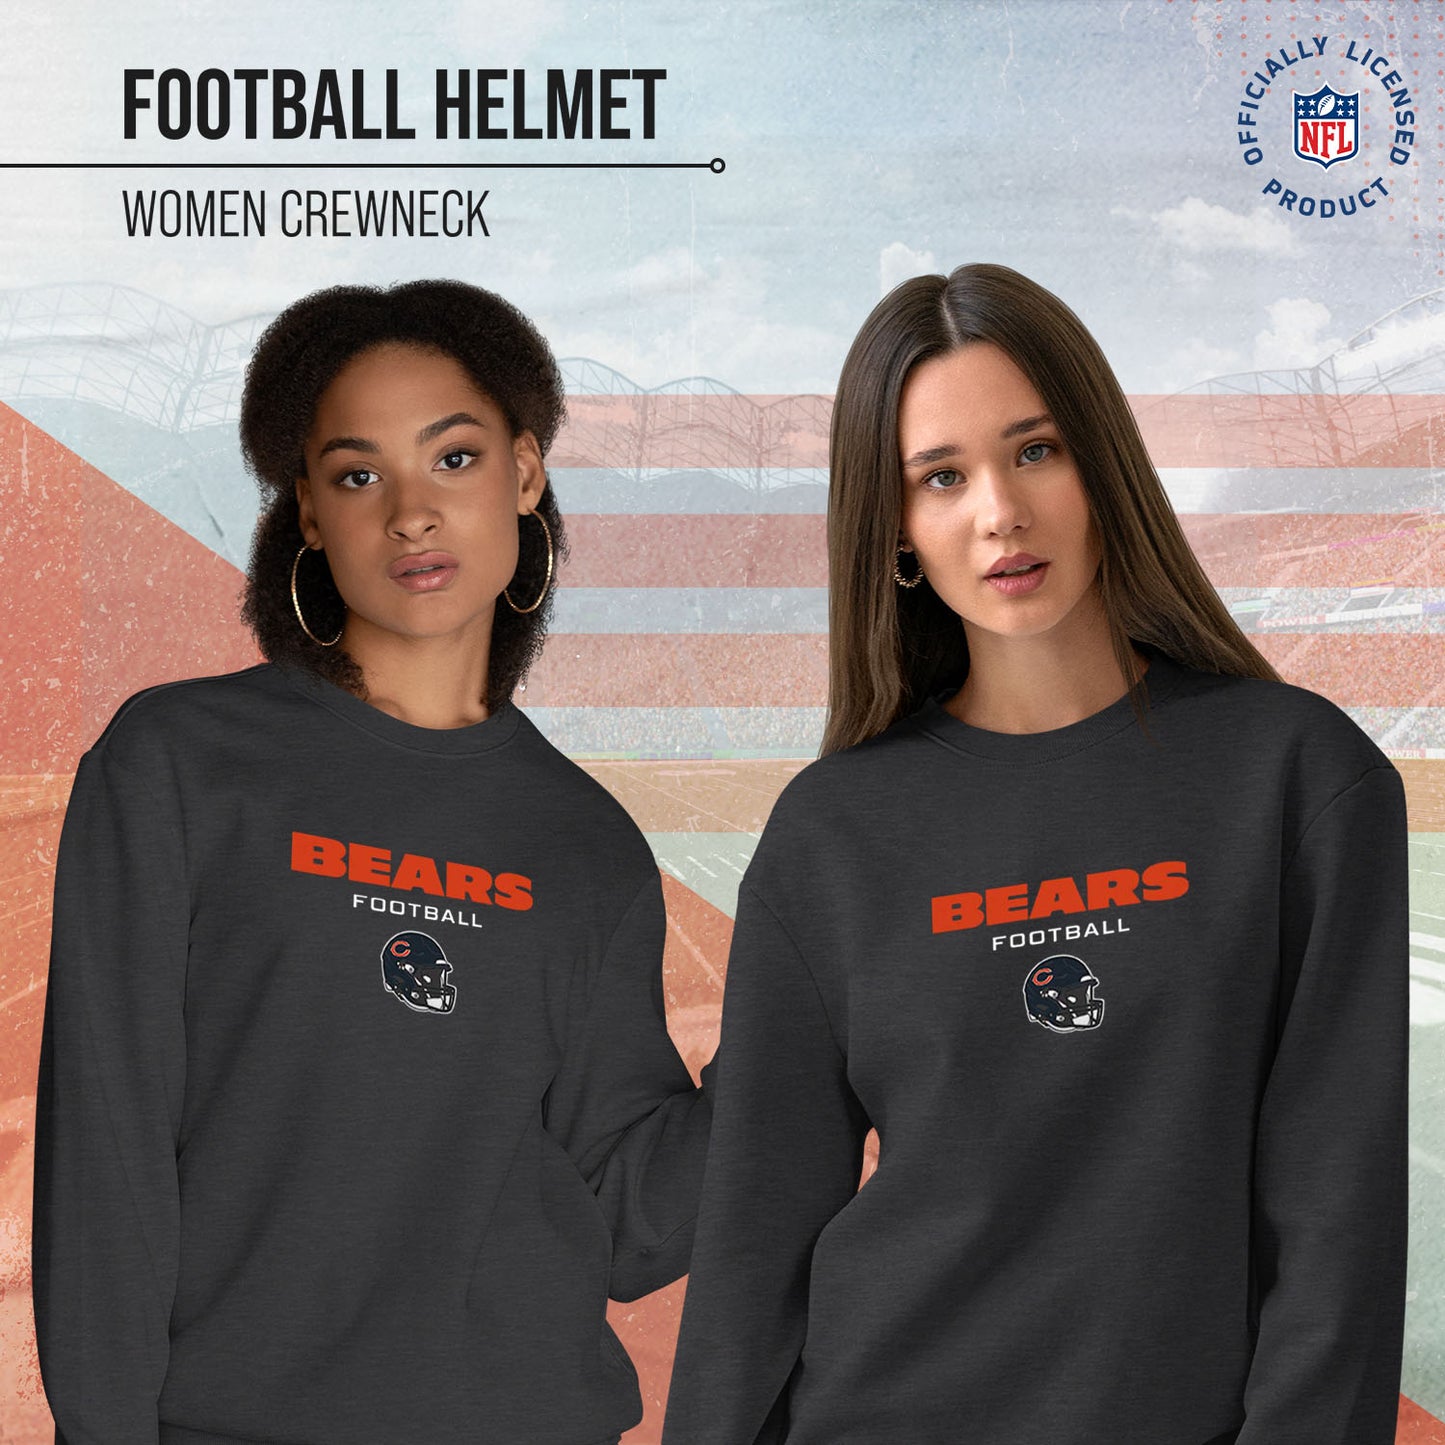 Chicago Bears Women's NFL Football Helmet Charcoal Slouchy Crewneck -Tagless Lightweight Pullover - Charcoal